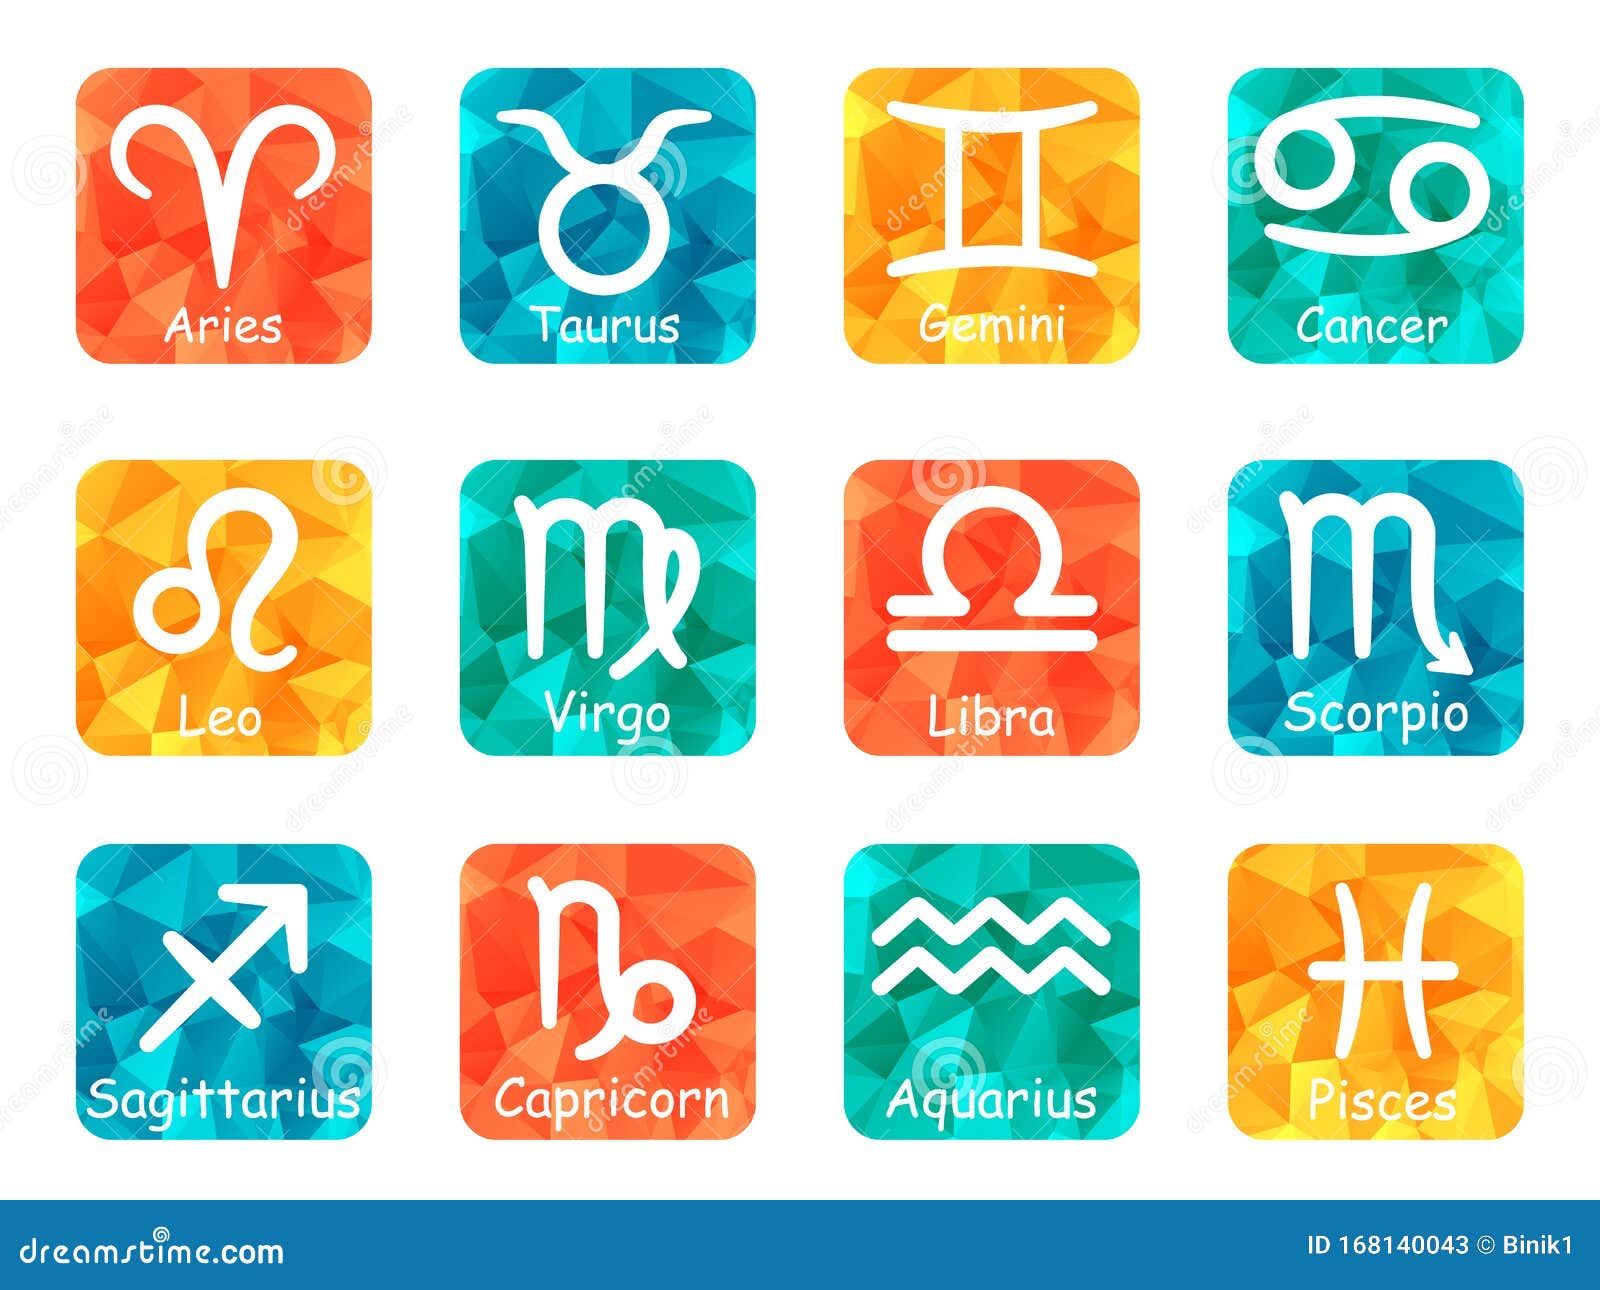 Zodiac Sign Symbols Vector with Captions on Colorful Buttons Stock ...